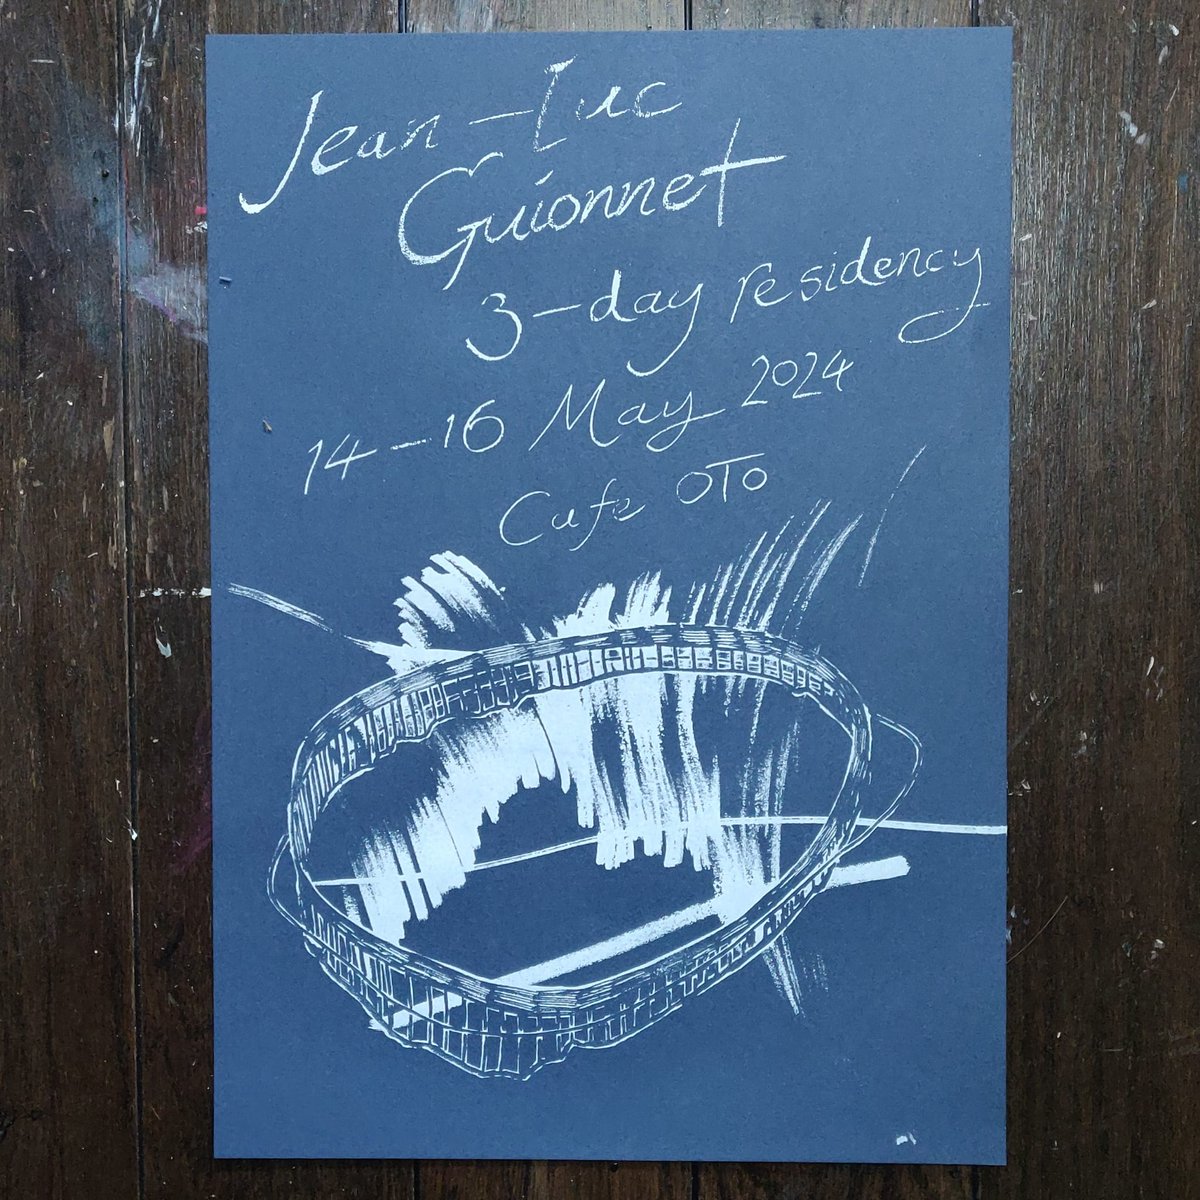 Poster for next week's unmissable residency with the great Parisian artist, Jean-Luc Guionnet! These will be available on all 3 nights. Check the excellent line-up here: cafeoto.co.uk/events/jean-lu…